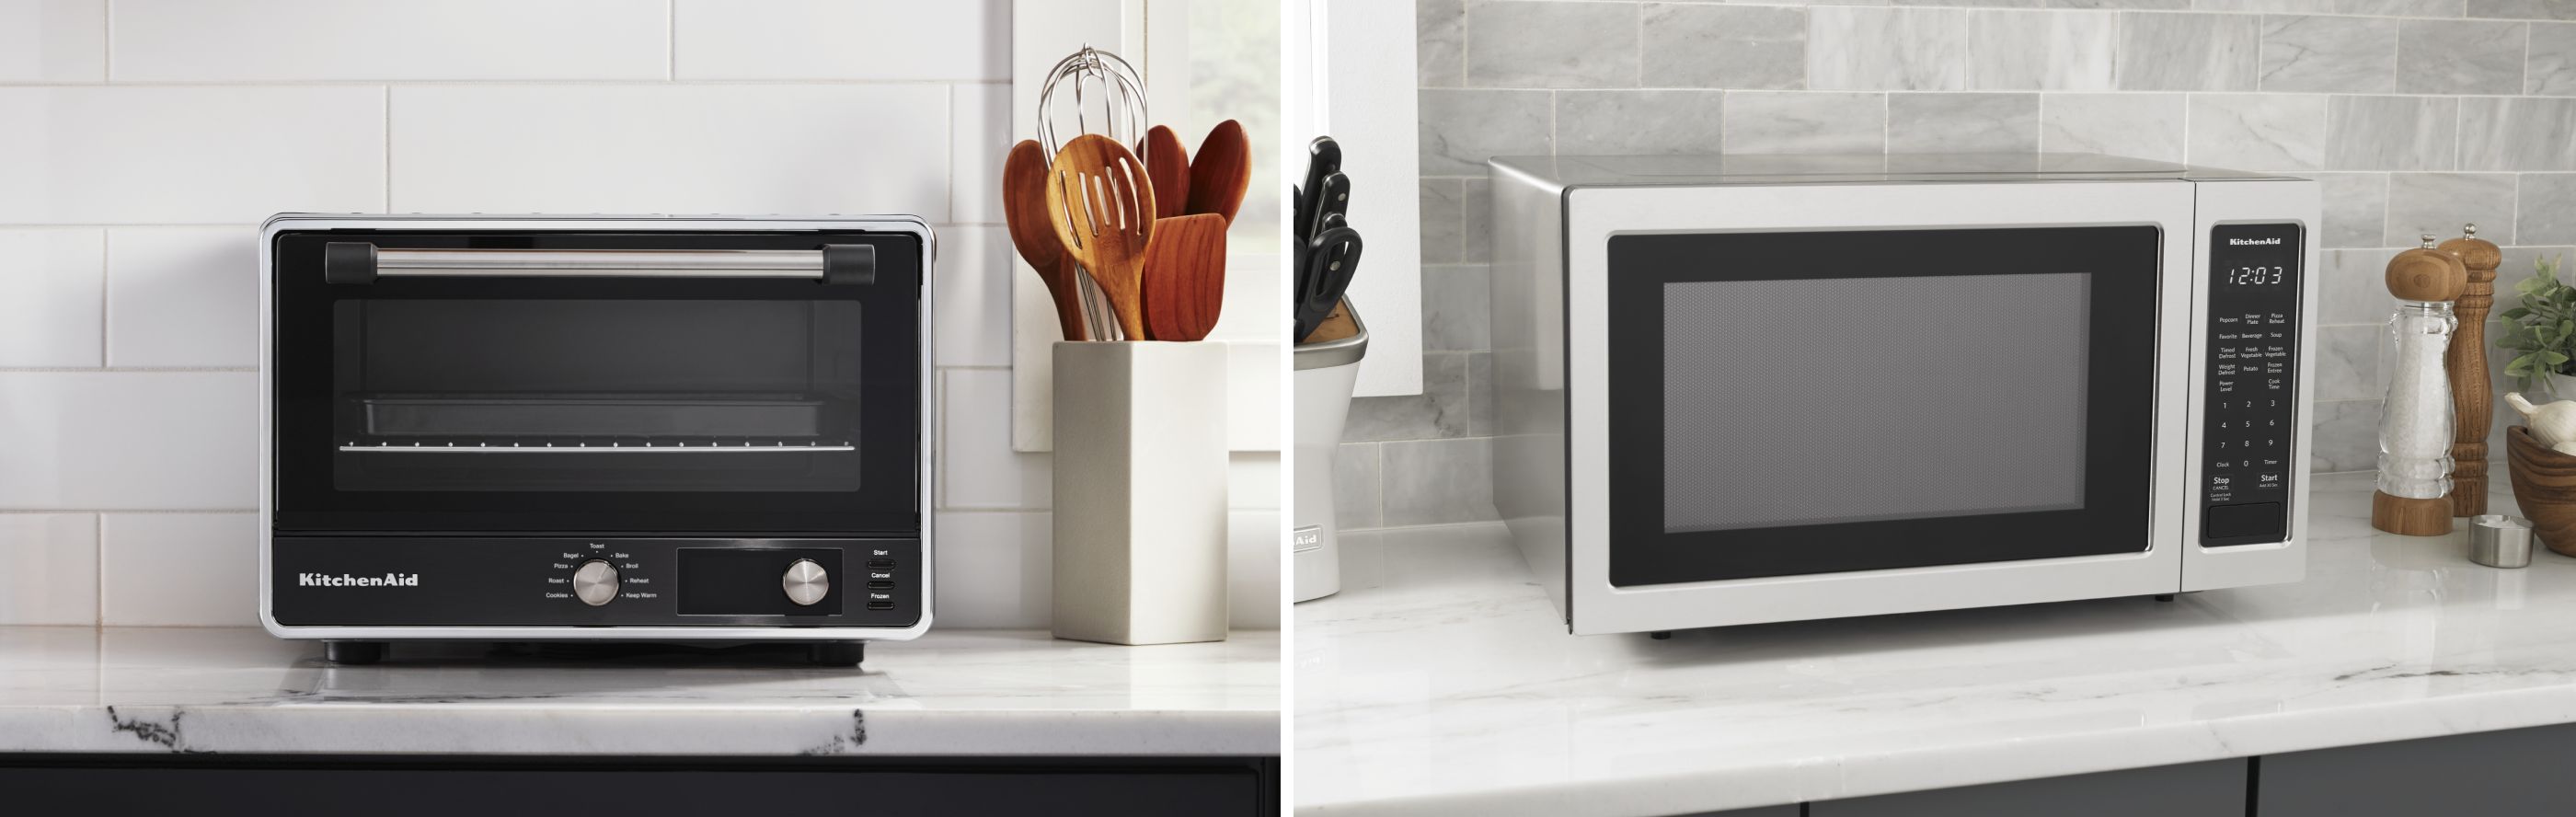 Side-by-side comparison of a black countertop oven and stainless steel countertop microwave